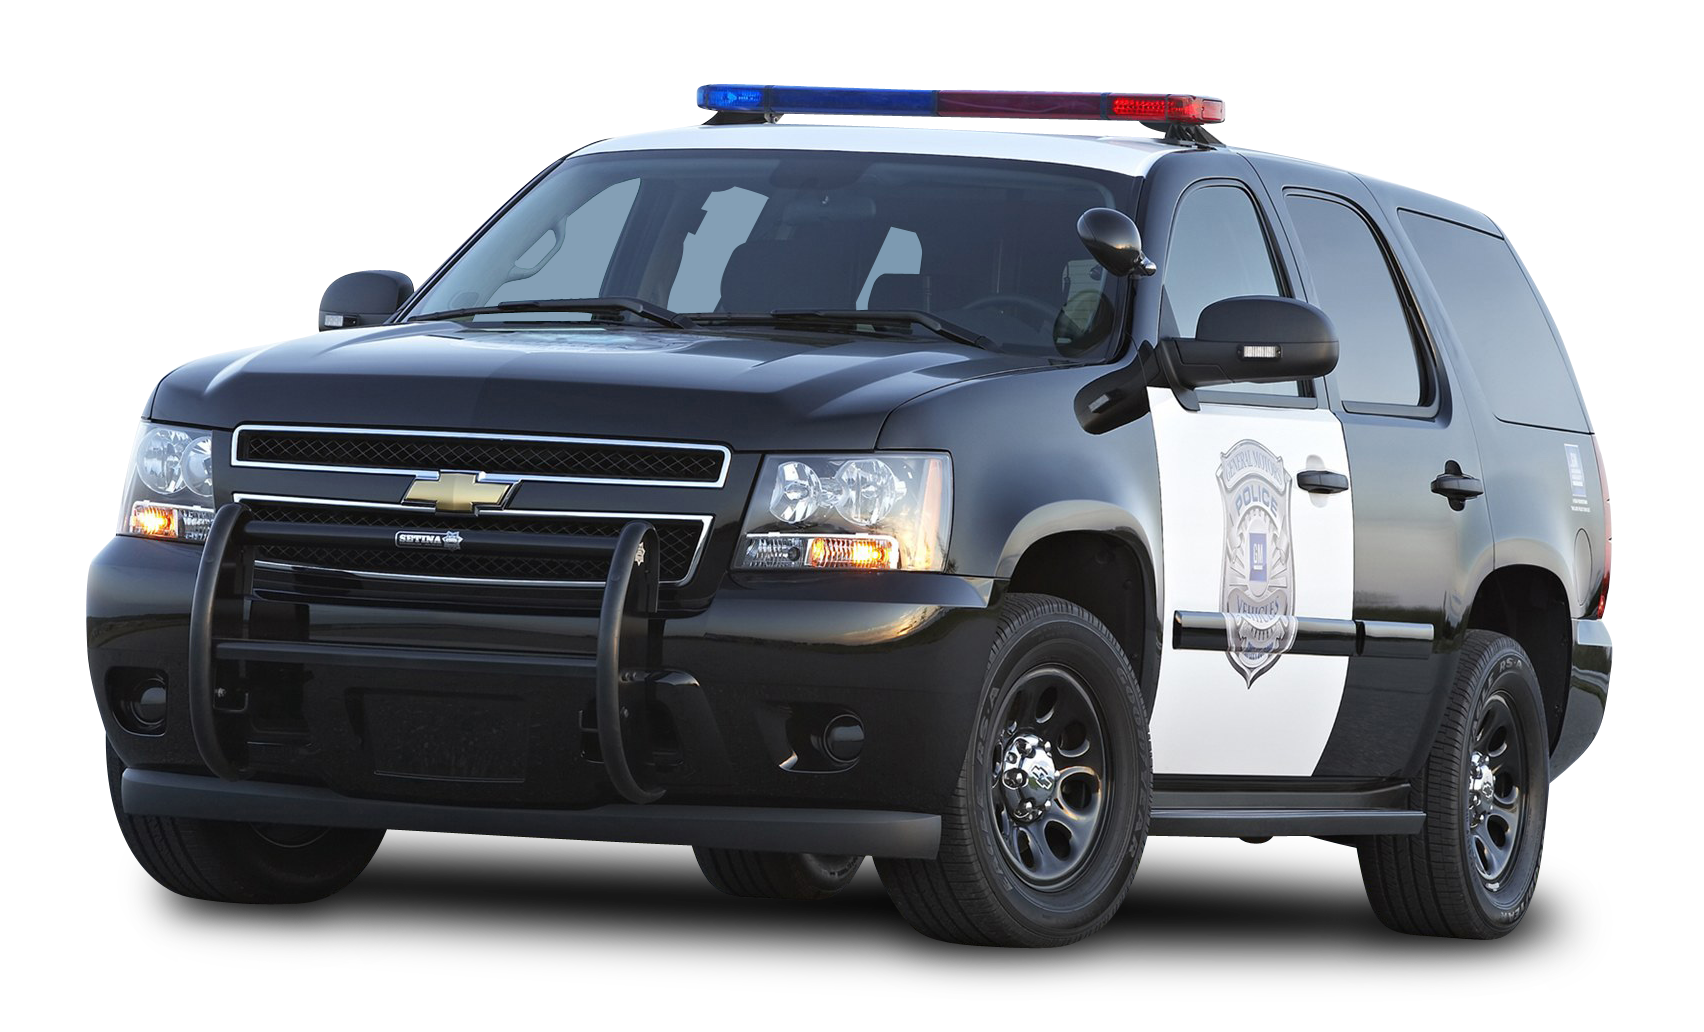 Black Chevy Tahoe Police SUV PPV Car PNG Image